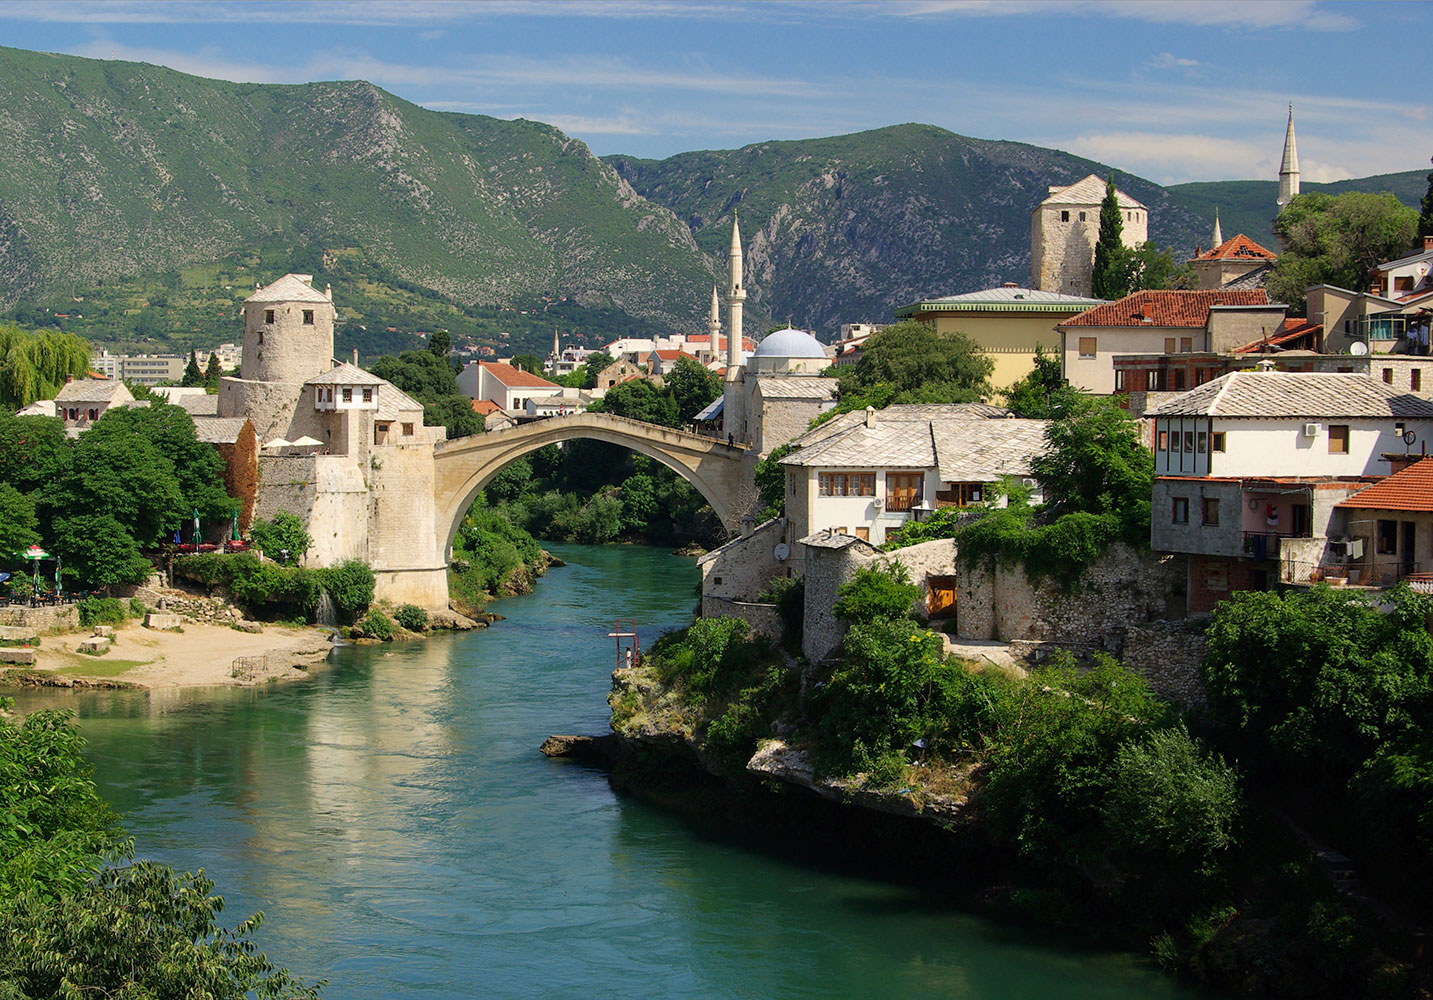 If You Get 14 on This Biggest Around World Quiz, Congratulations, You Have Big Brain Stari Most or Old Mostar Bridge, Bosnia and Herzegovina